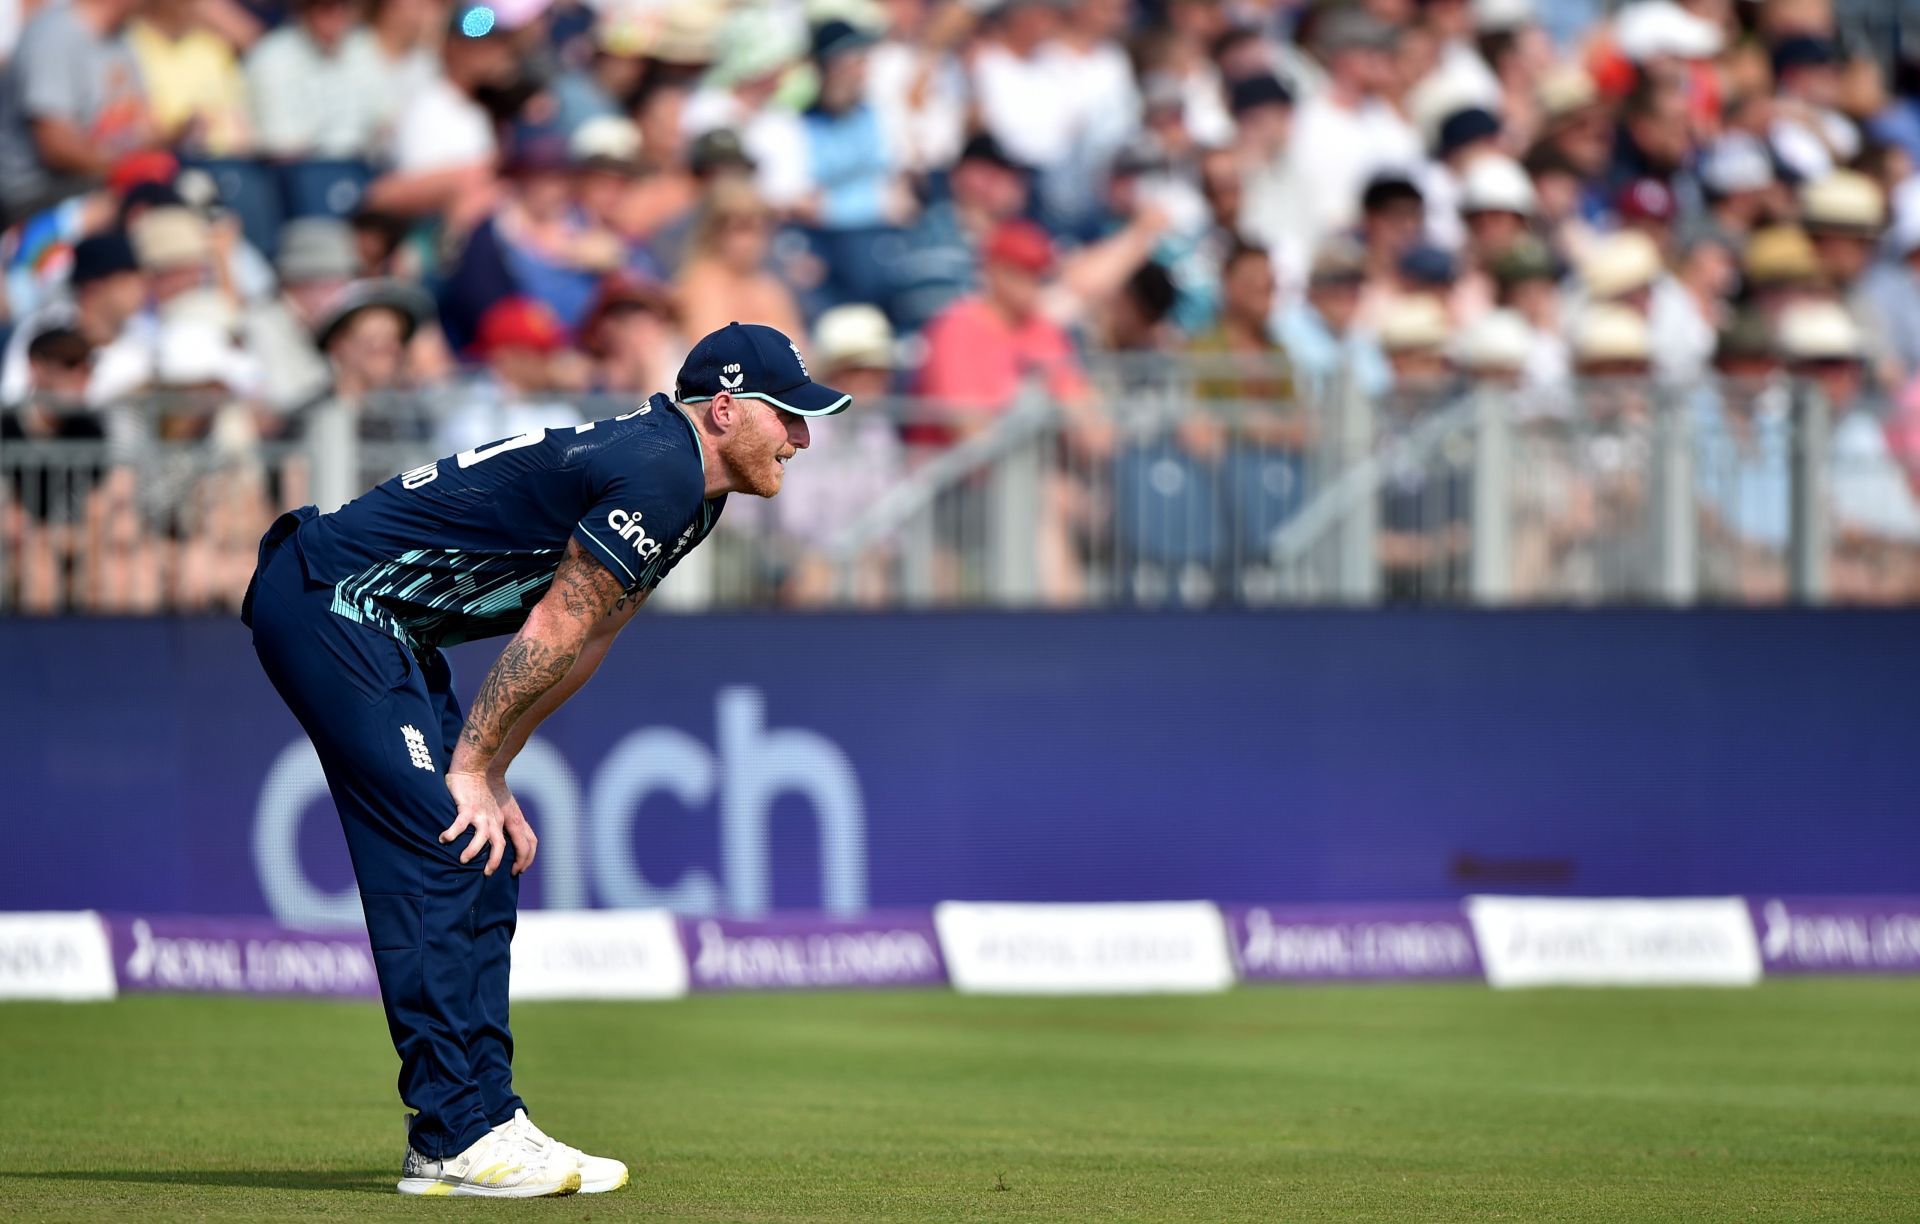 Ben Stokes of England looks on during the 1st ODI against South Africa. Pic: Getty Images